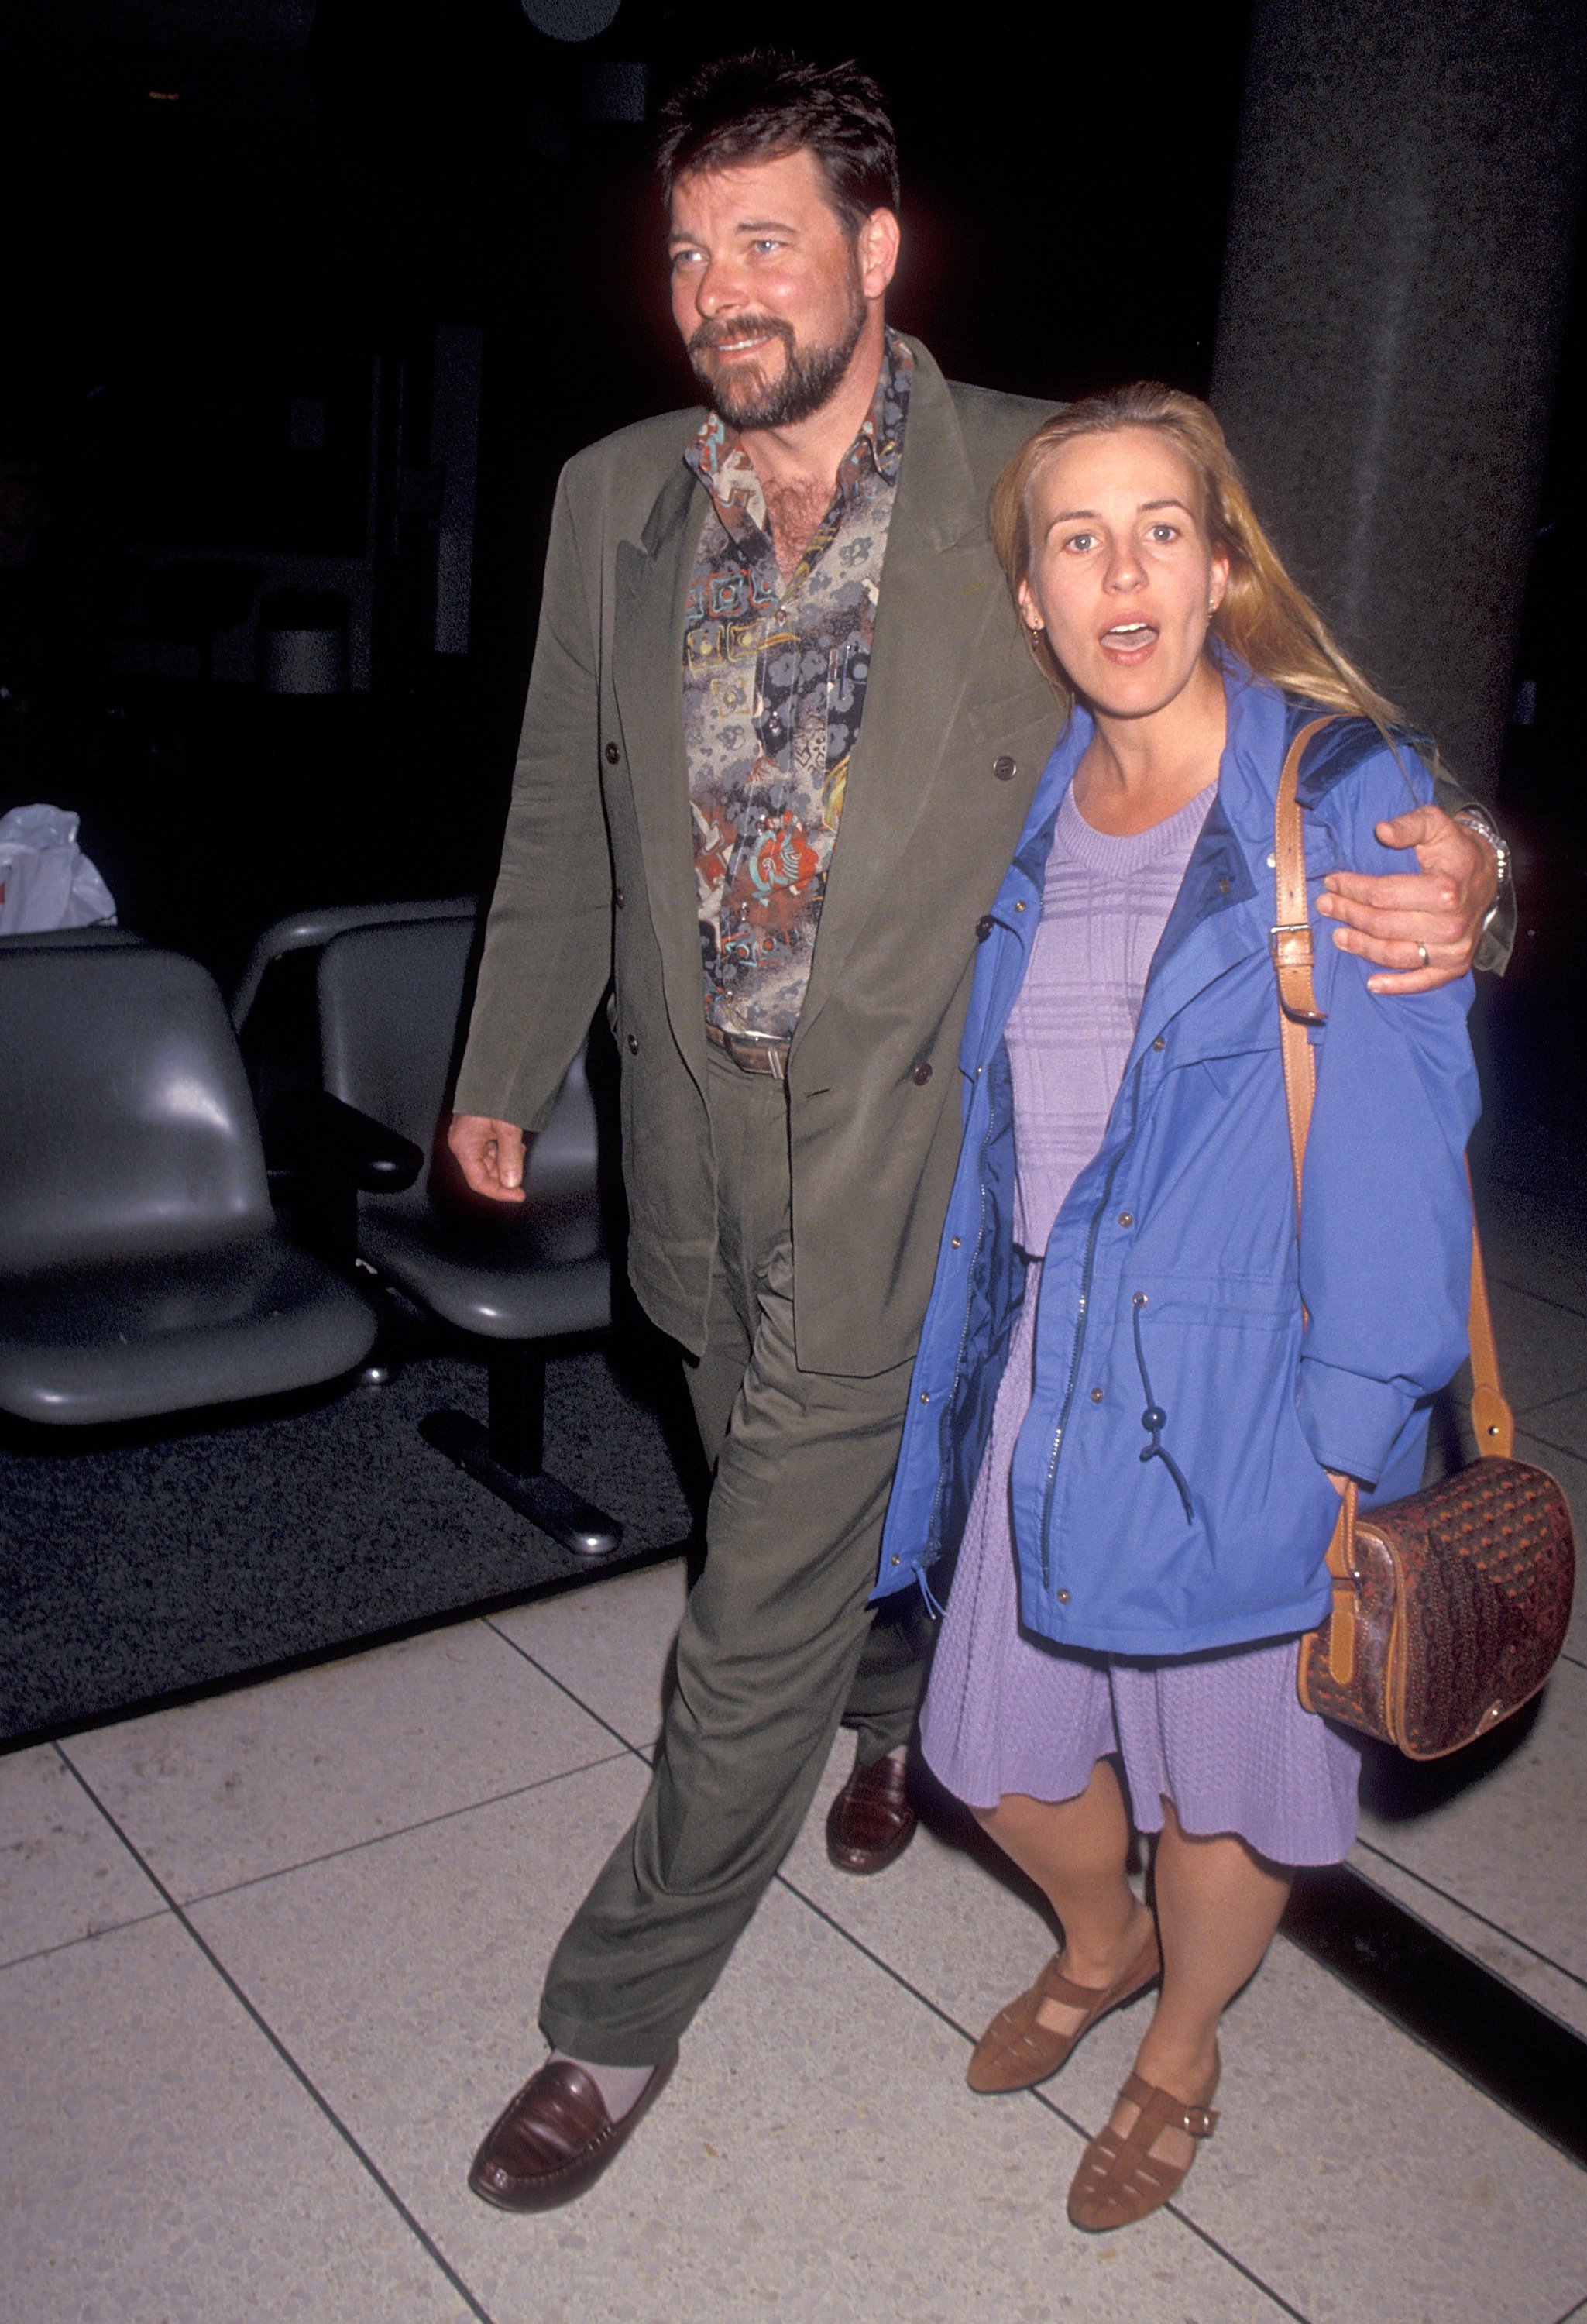 Jonathan Frakes and Genie Francis on January 2, 1994, at the Los Angeles International Airport in Los Angeles, California. | Source: Getty Images